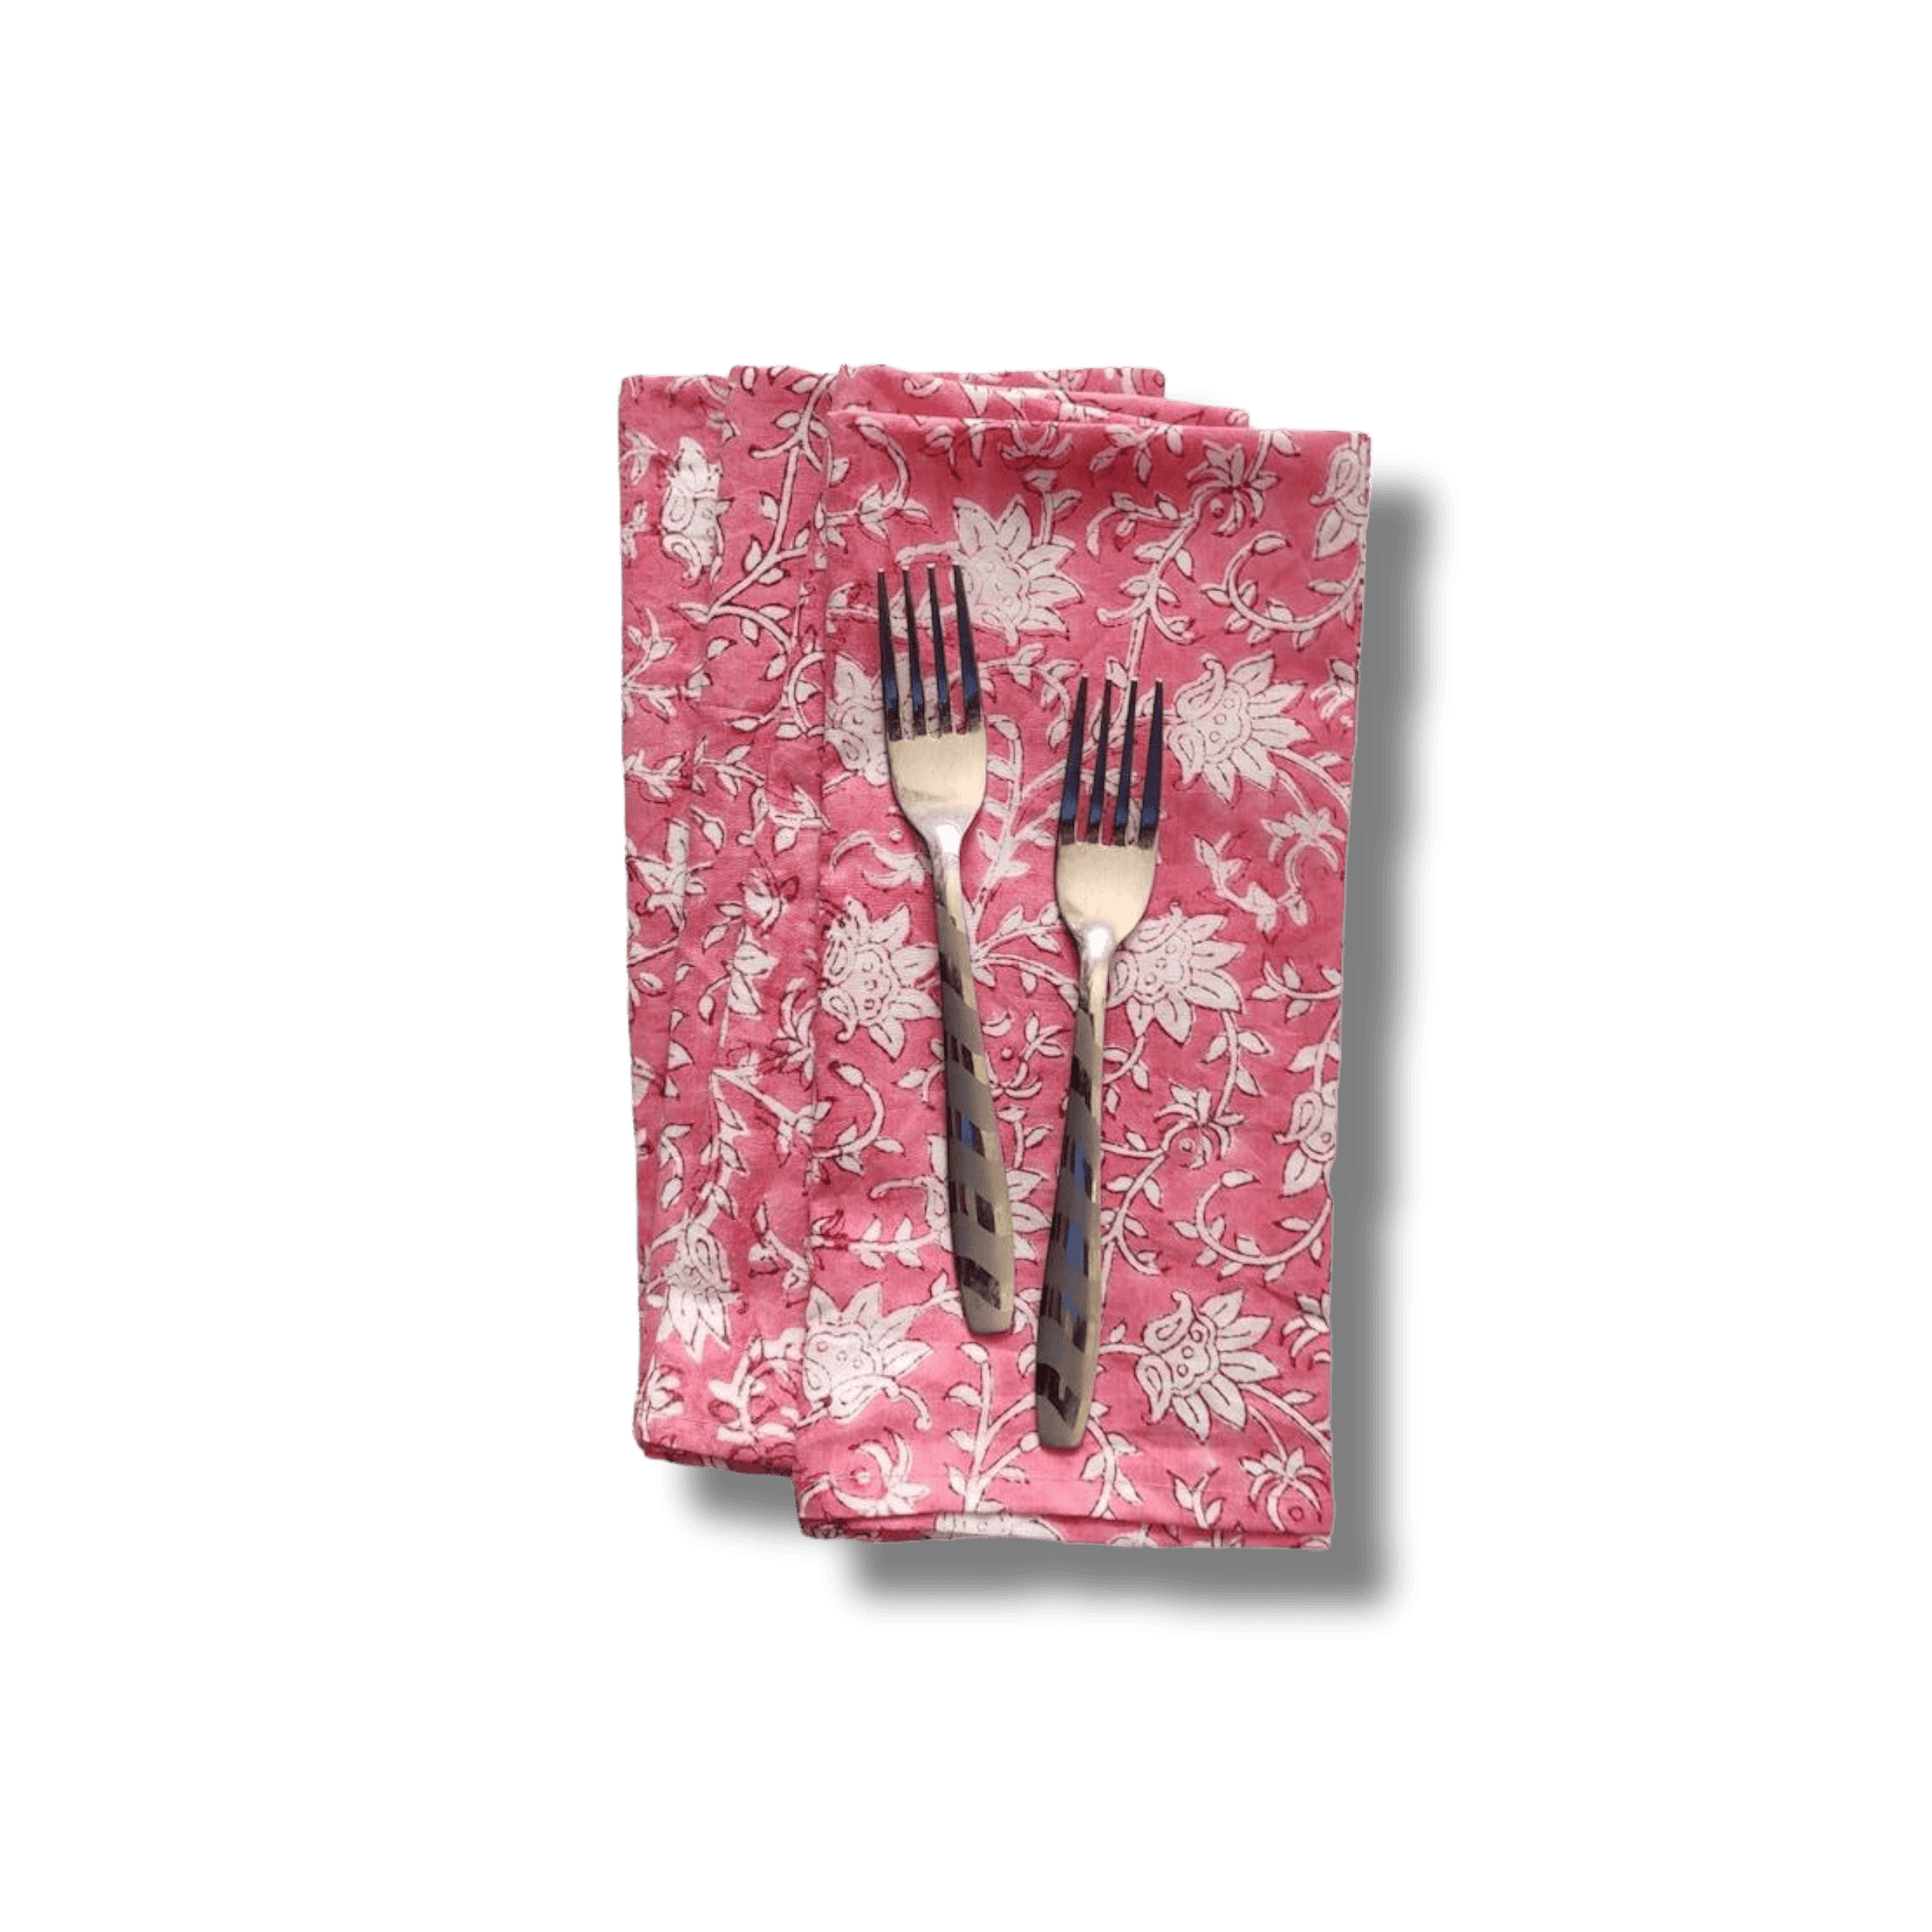 White and Pink Floral Block Printed Cotton Napkins - MAIA HOMES